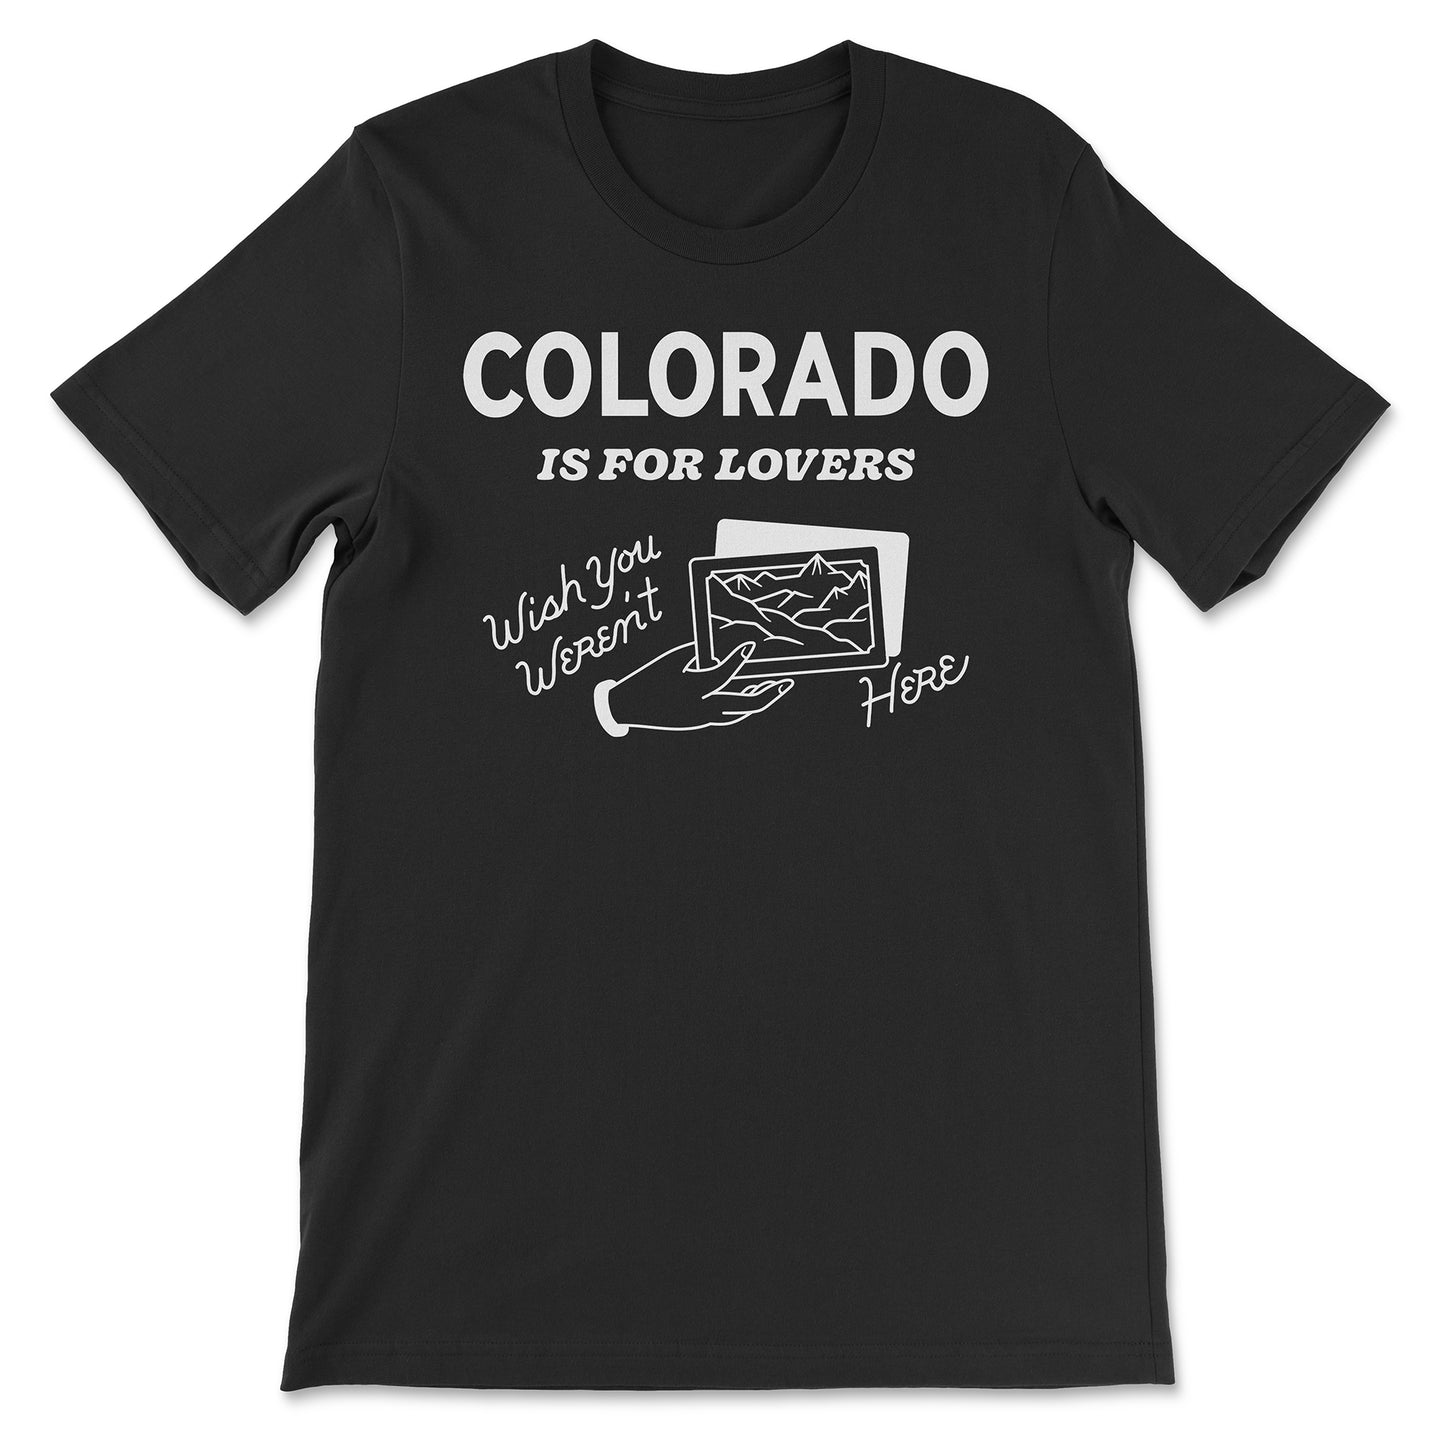 COLORADO Is For Lovers Festival Tee Shirt w/ STICKER SHEET